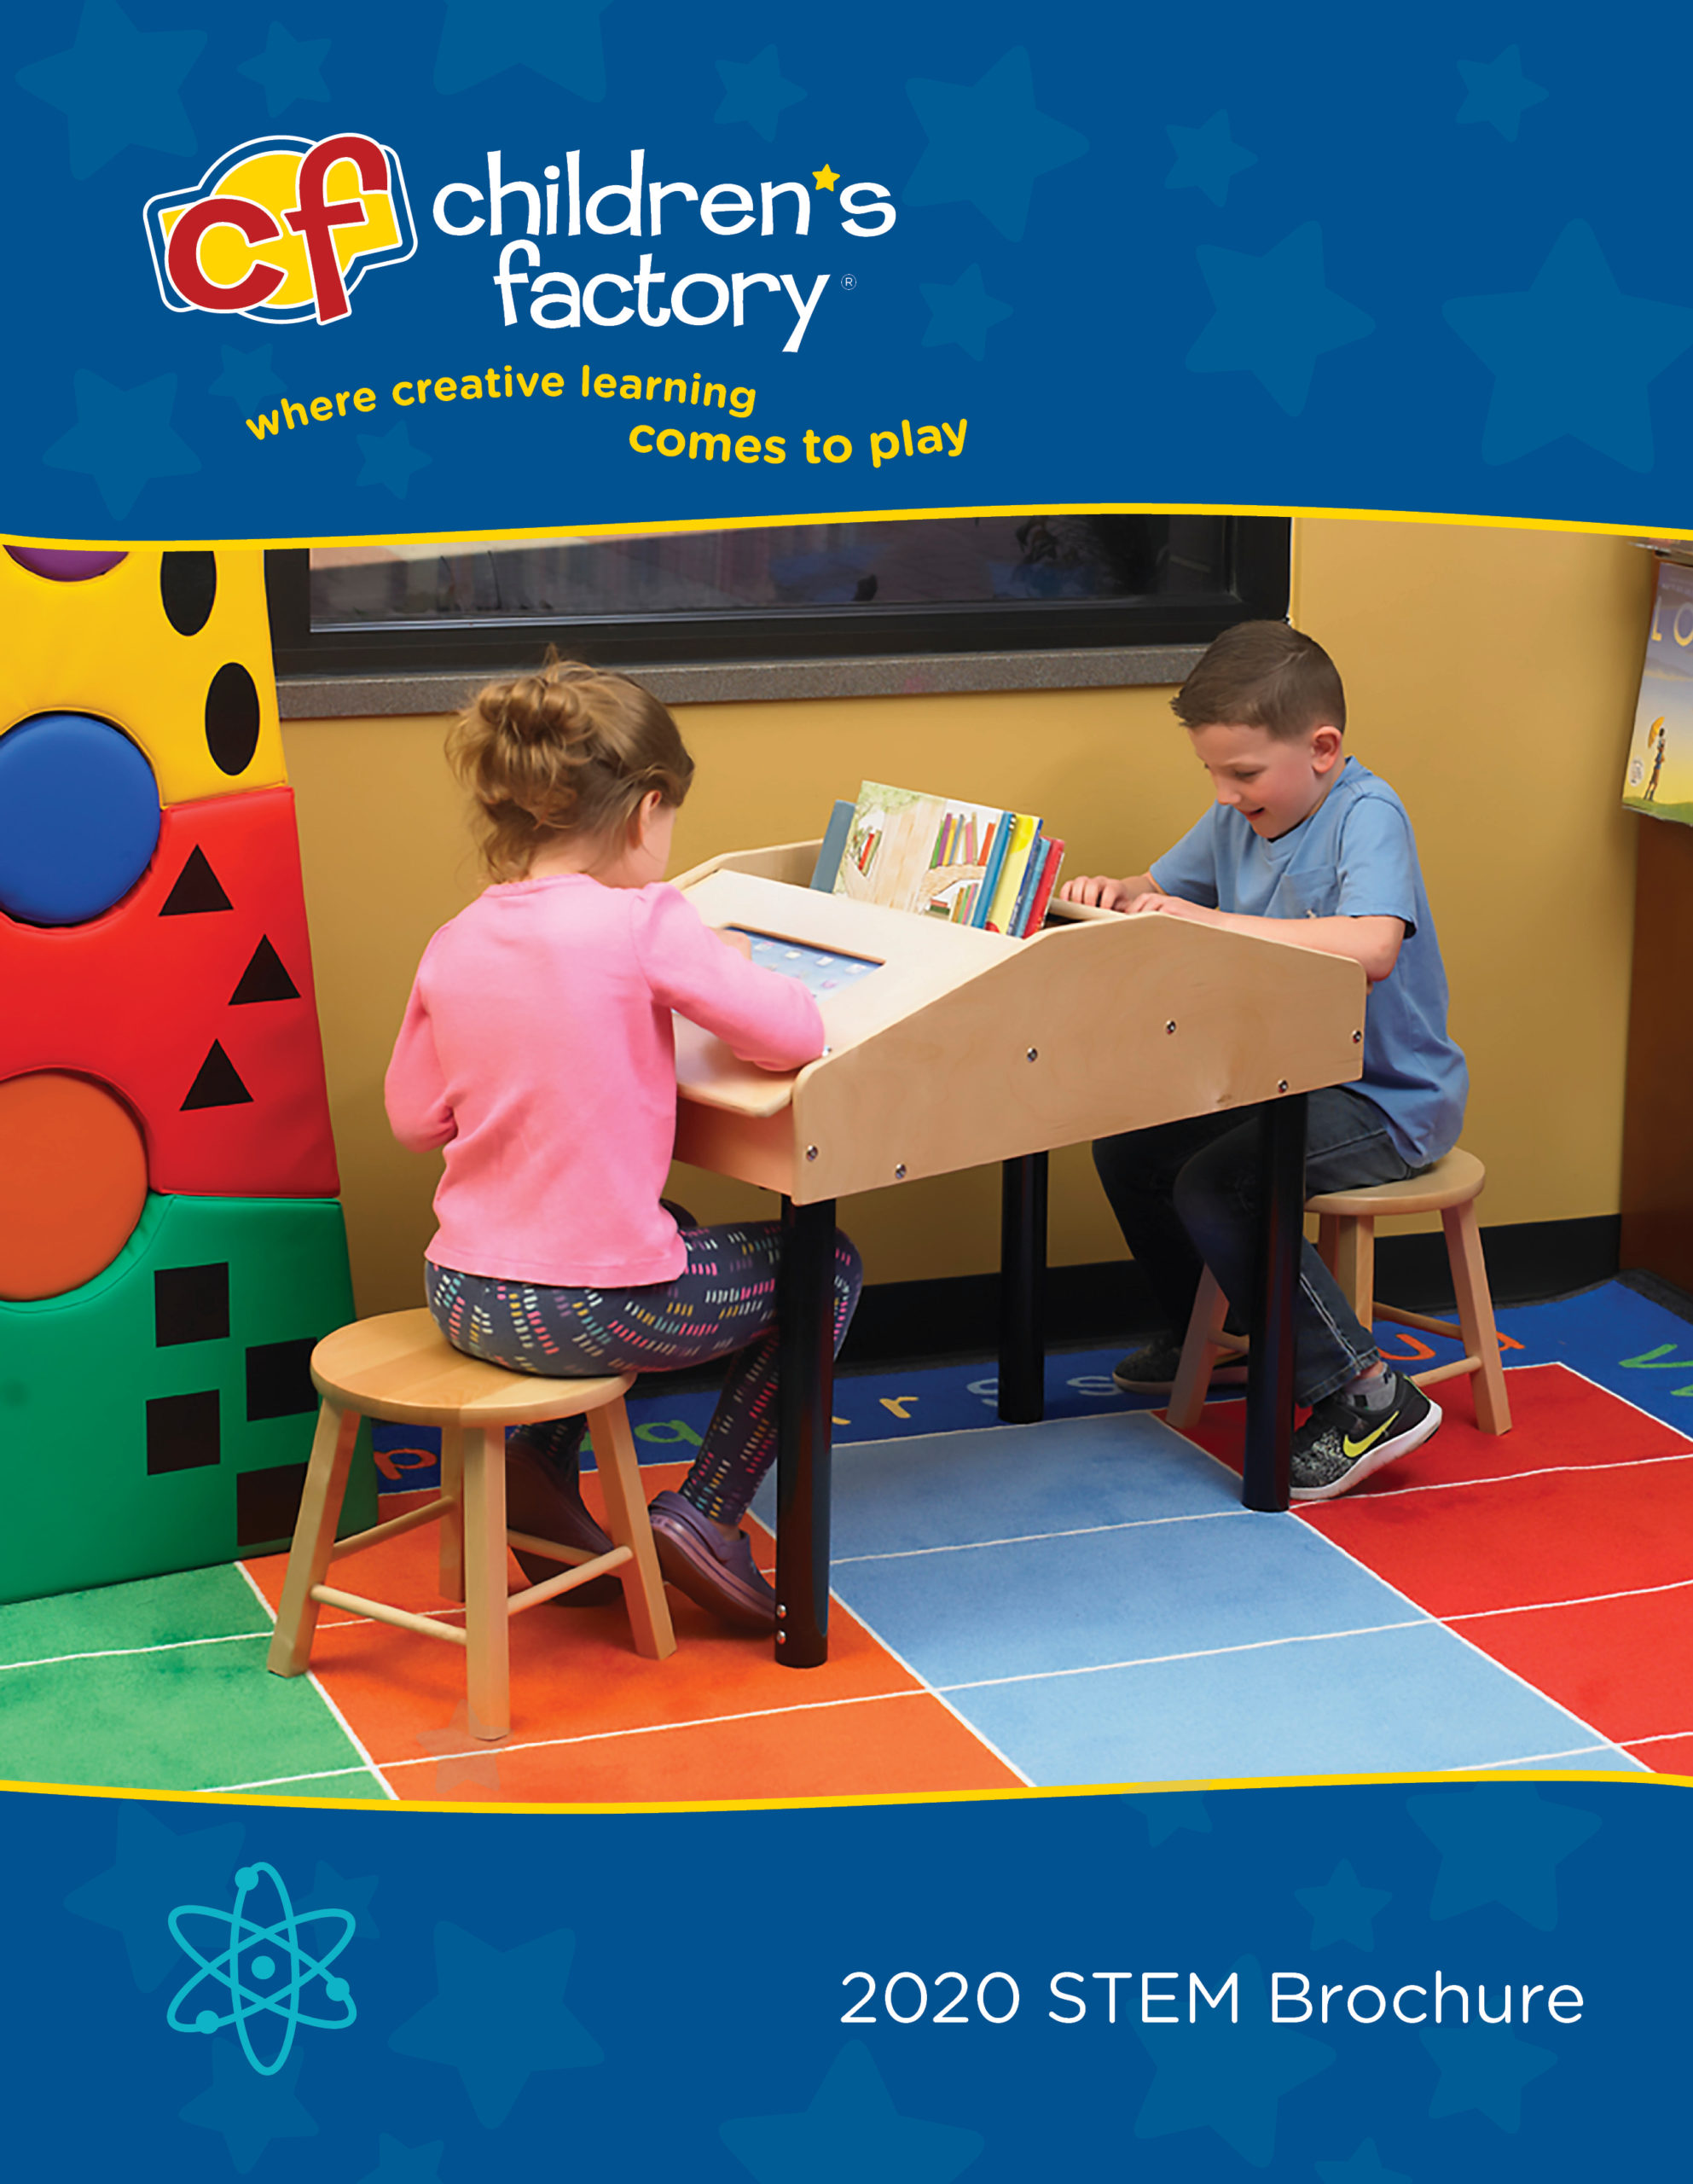 Catalog - Children's Factory - Quality Furnishings for Early Education